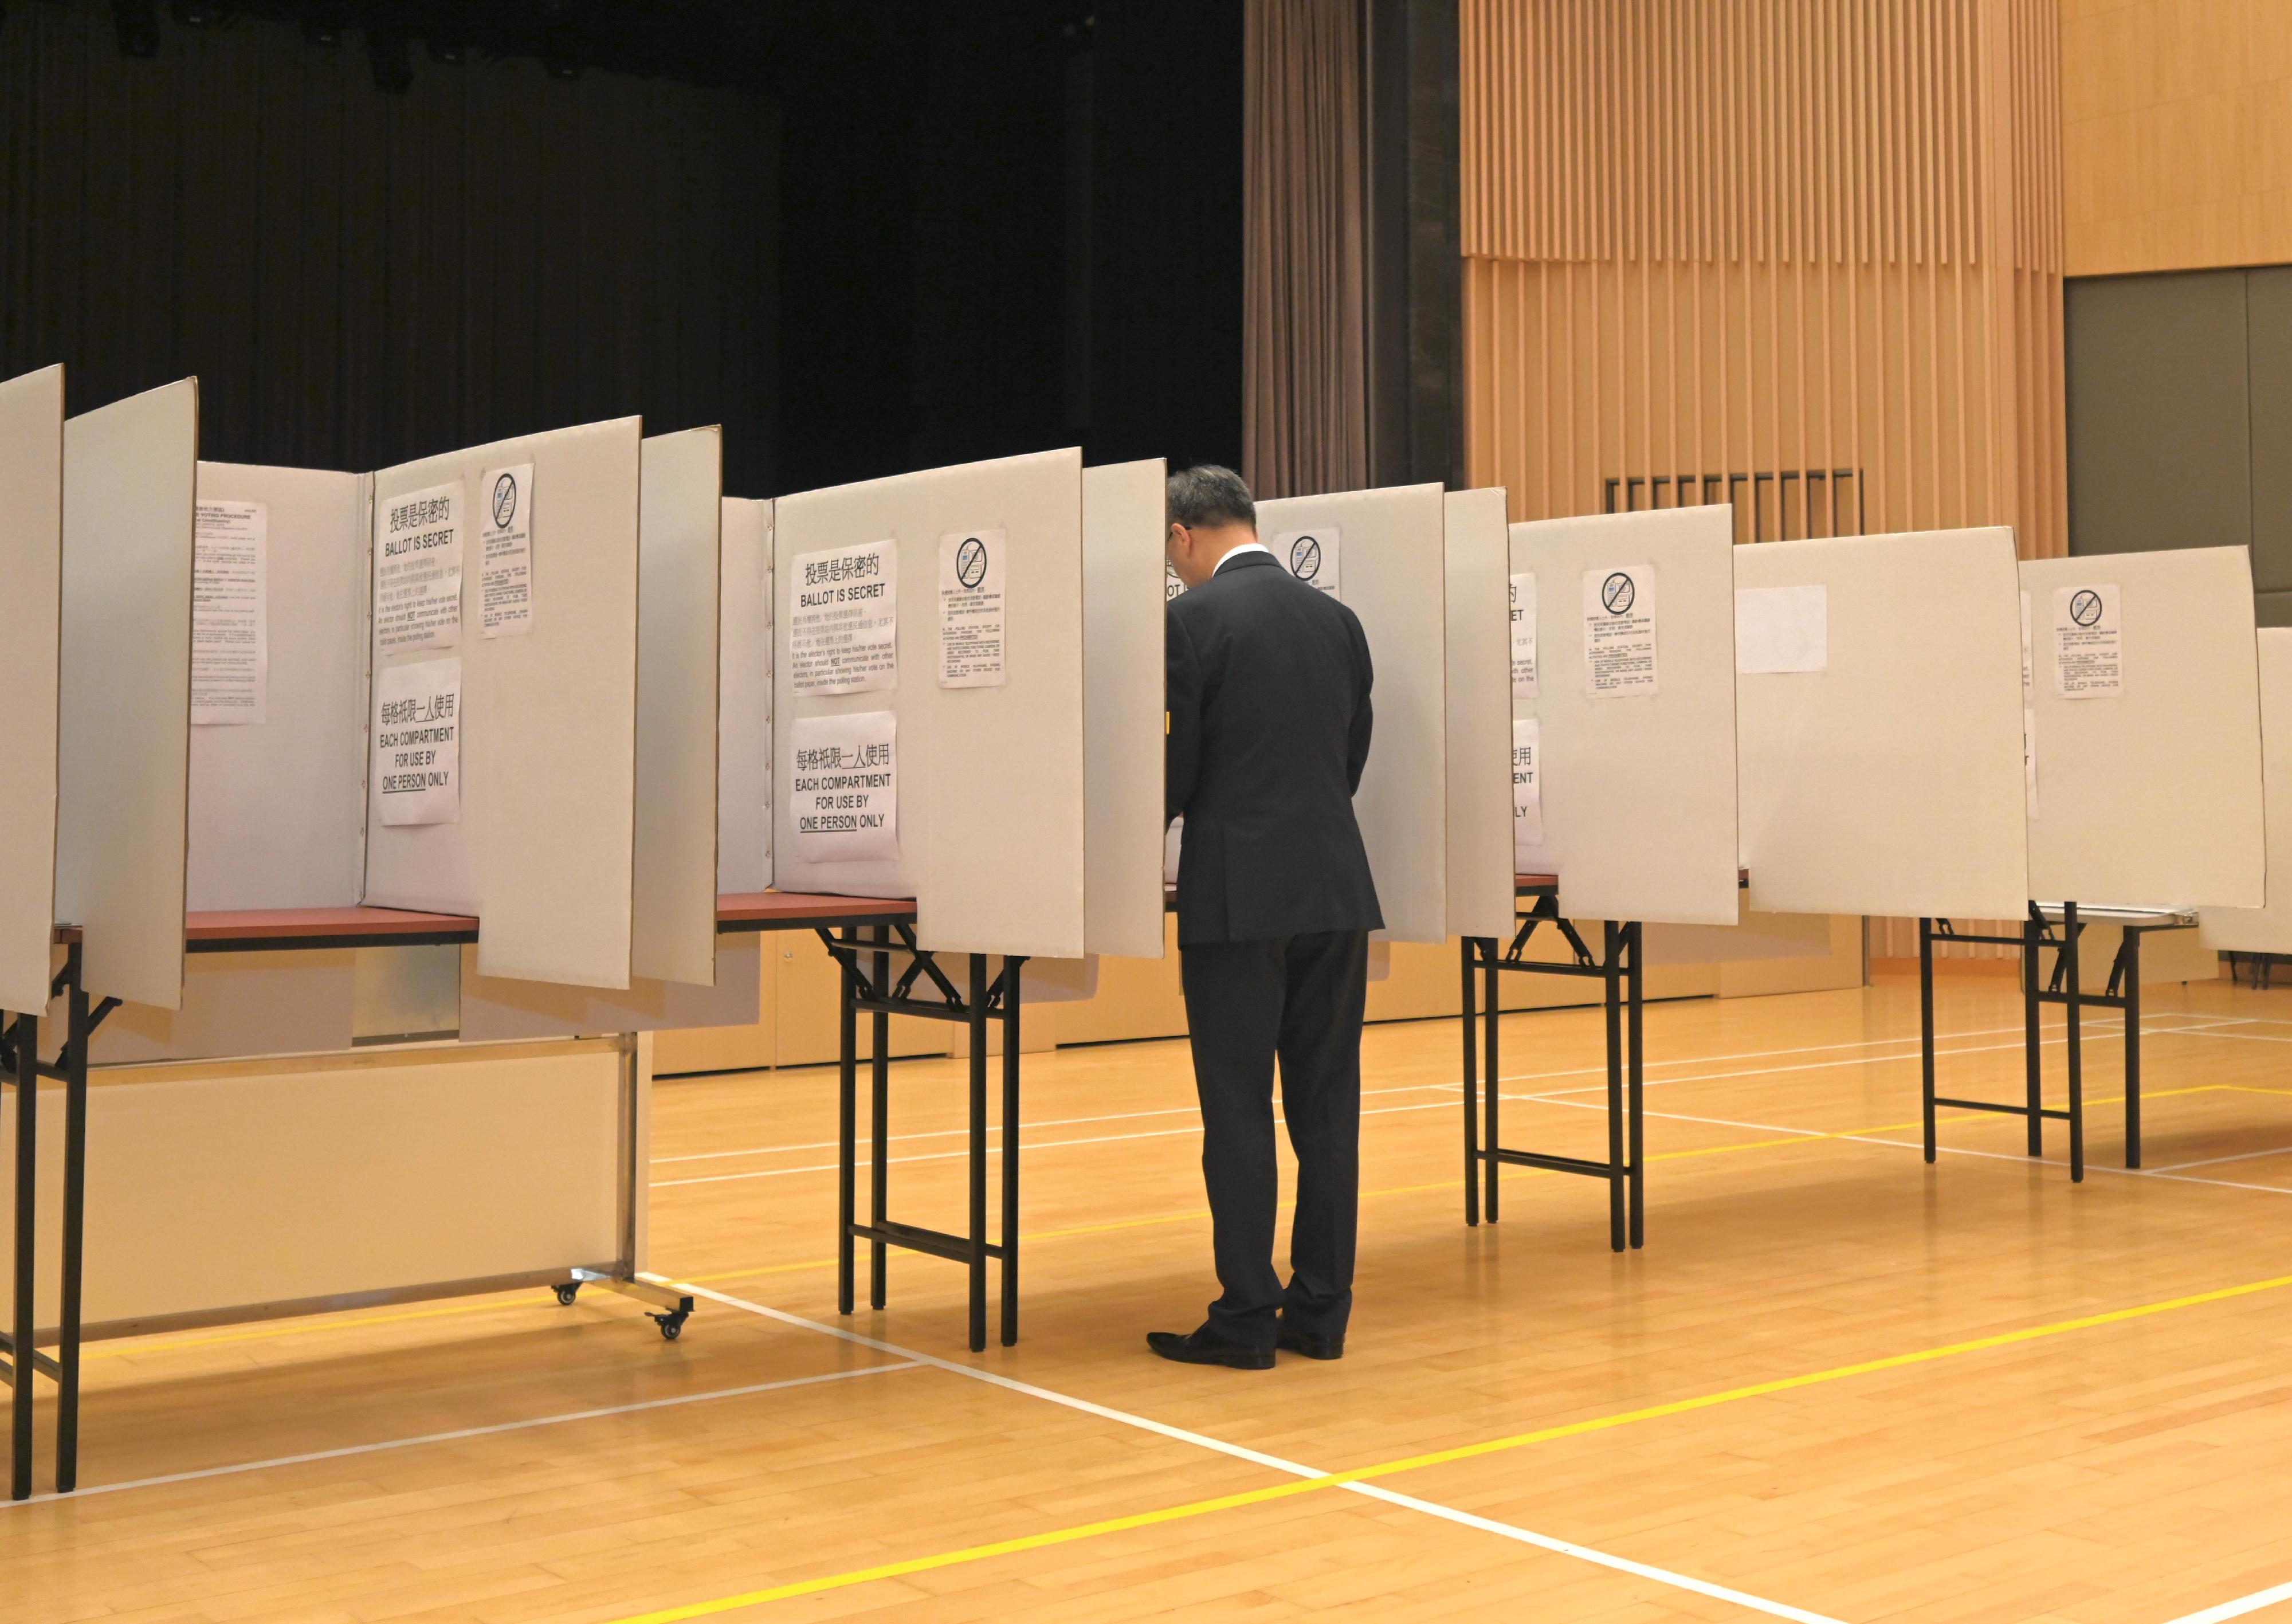 The Chairman of the Electoral Affairs Commission, Mr Justice David Lok, demonstrated the proper polling procedures of the District Council Ordinary Election during his visit to a mock polling station at the North Point Community Hall today (December 5). Photo shows Mr Justice Lok demonstrating the marking of a ballot paper inside a voting compartment.